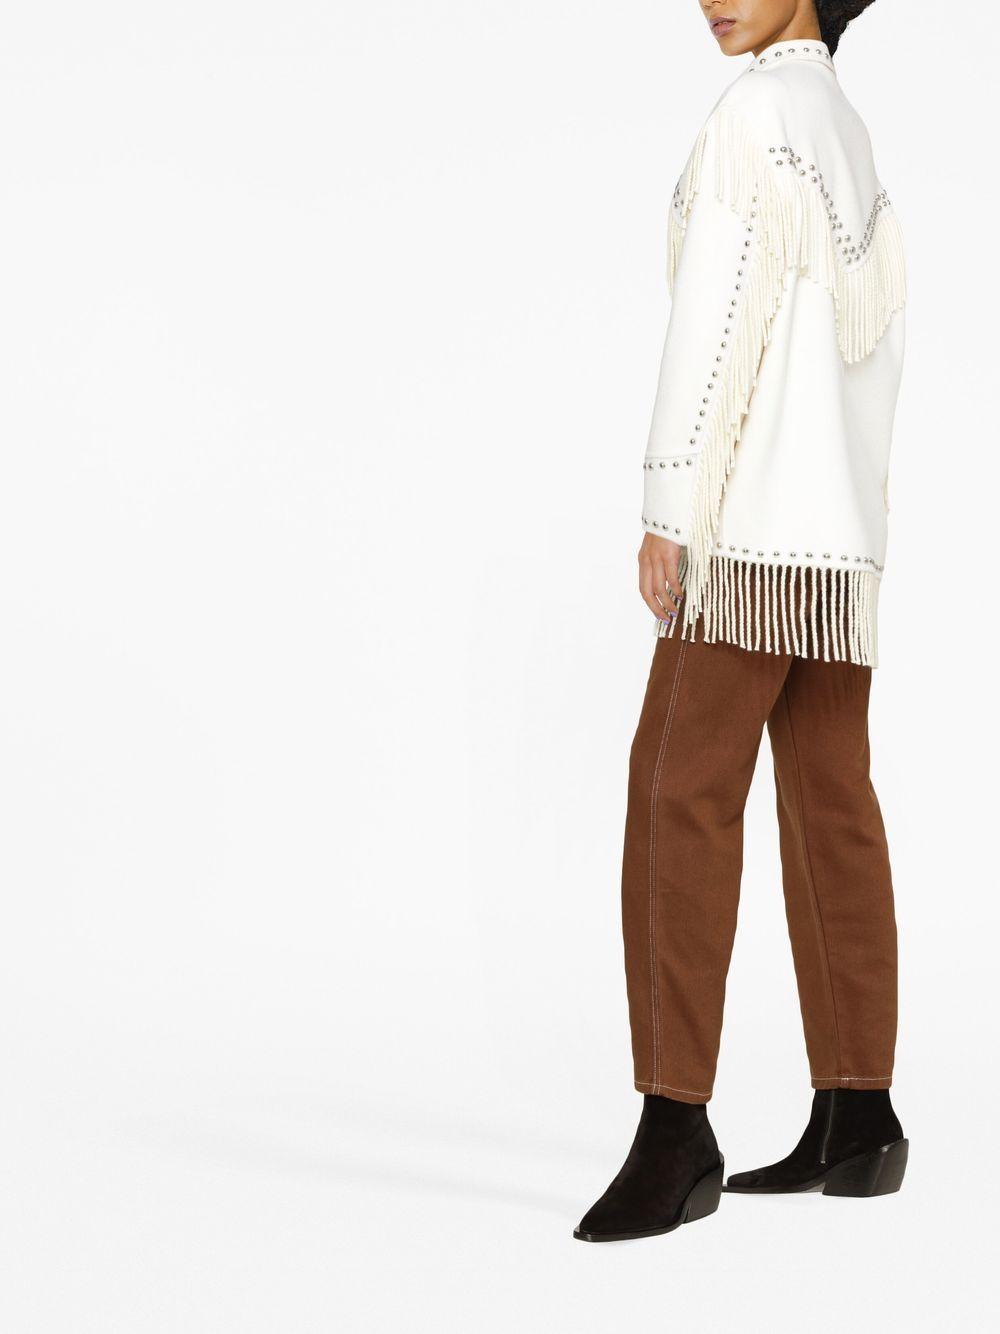 P.A.R.O.S.H. Studded Fringed Jacket in White | Lyst